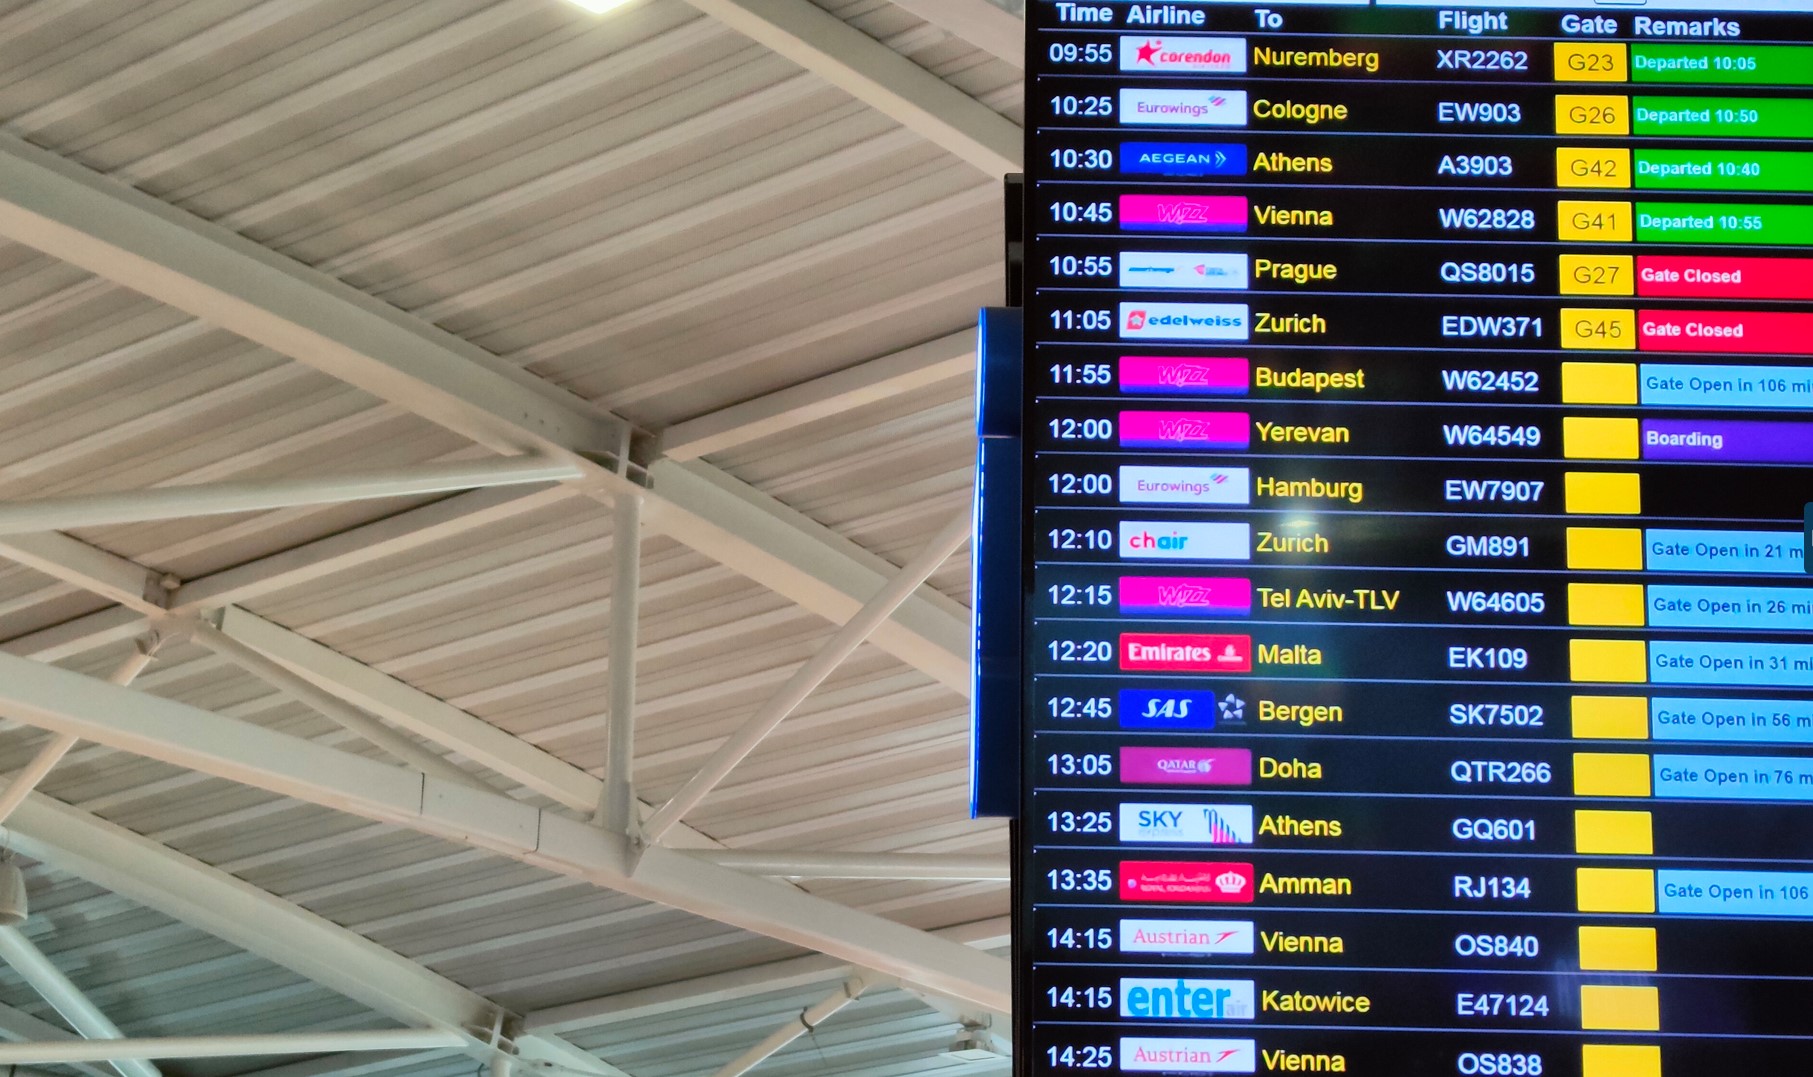 Airport flights timetable. Image by PixMeta